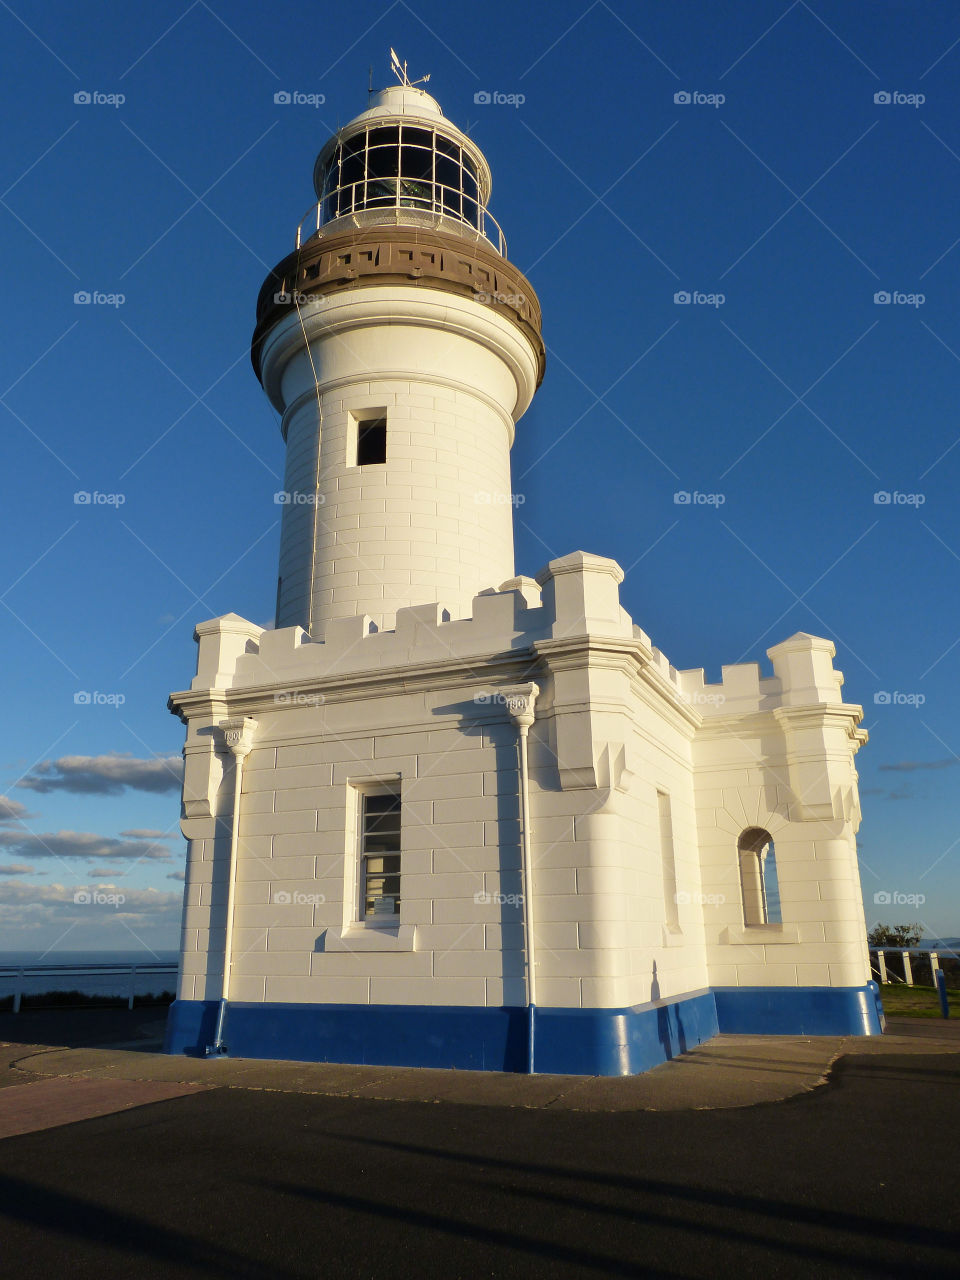 lighthouse byron bay by harry.hobson1